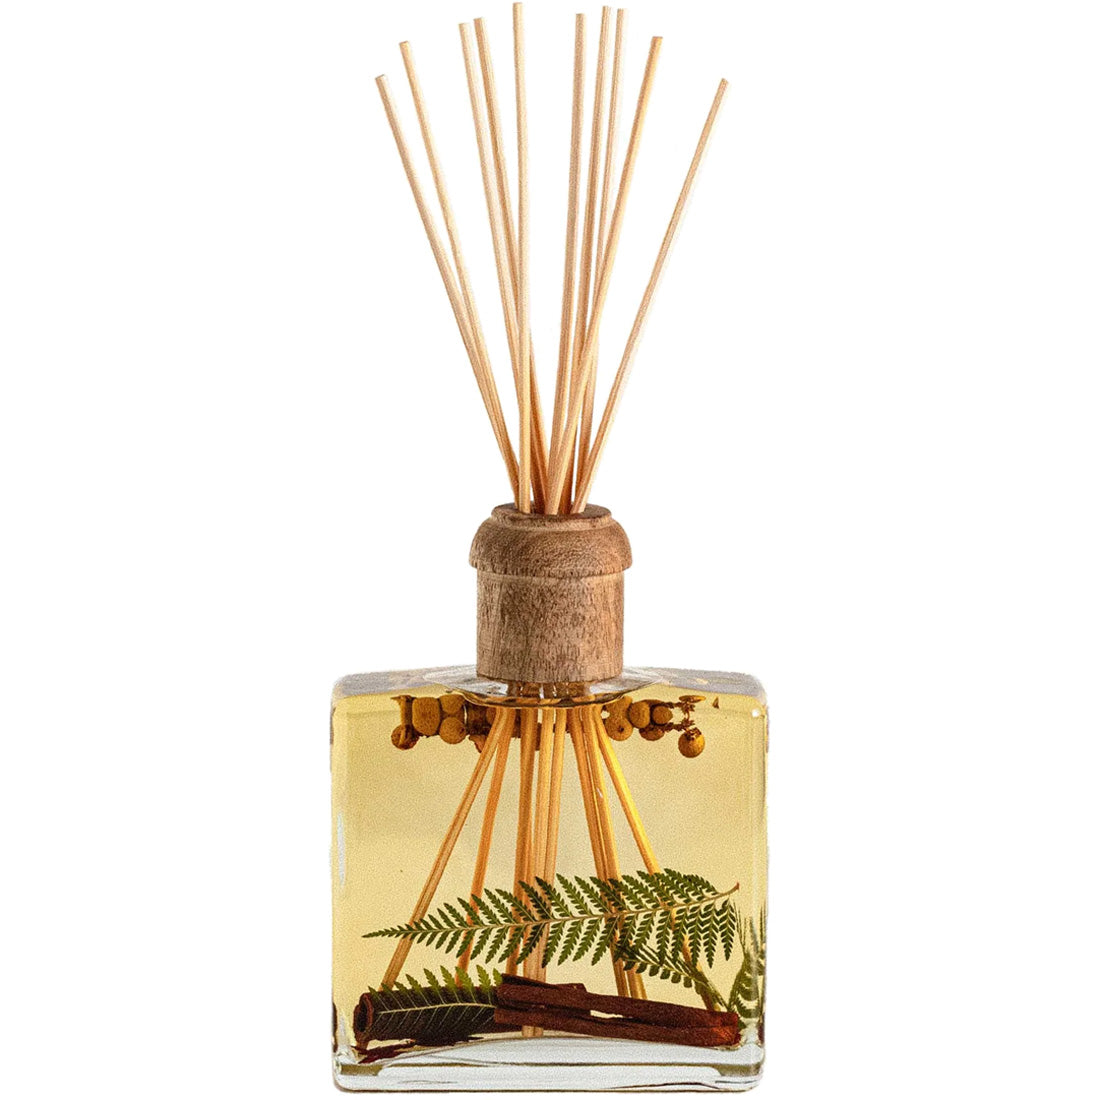 Rosy Rings Botanical Reed Diffuser 13oz